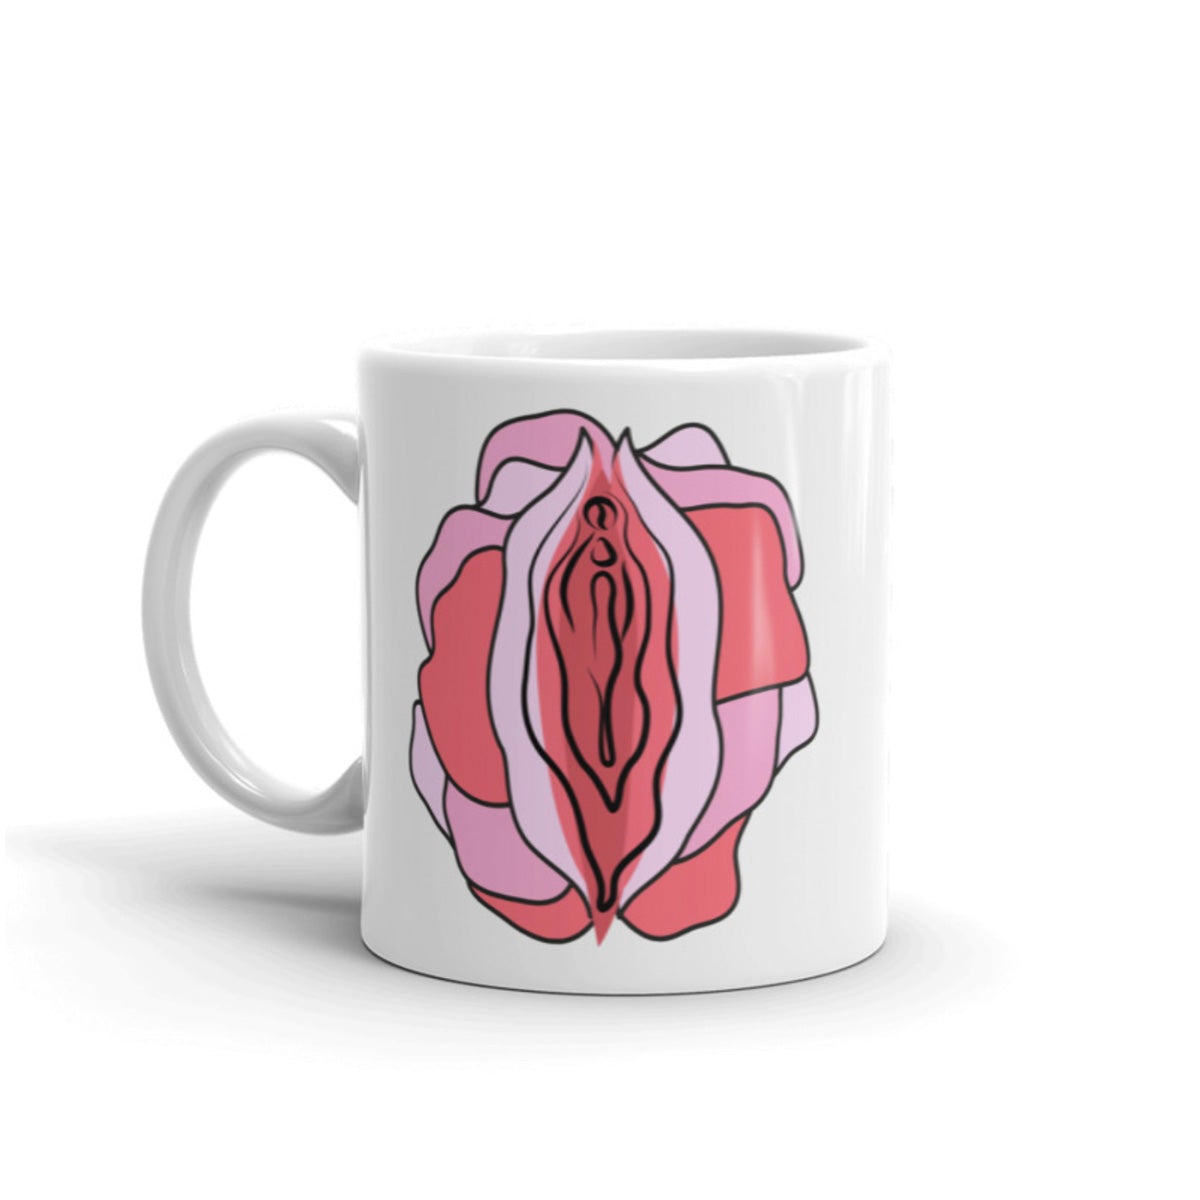 Feminist gifts, coffee mug, valentine's day gifts for her